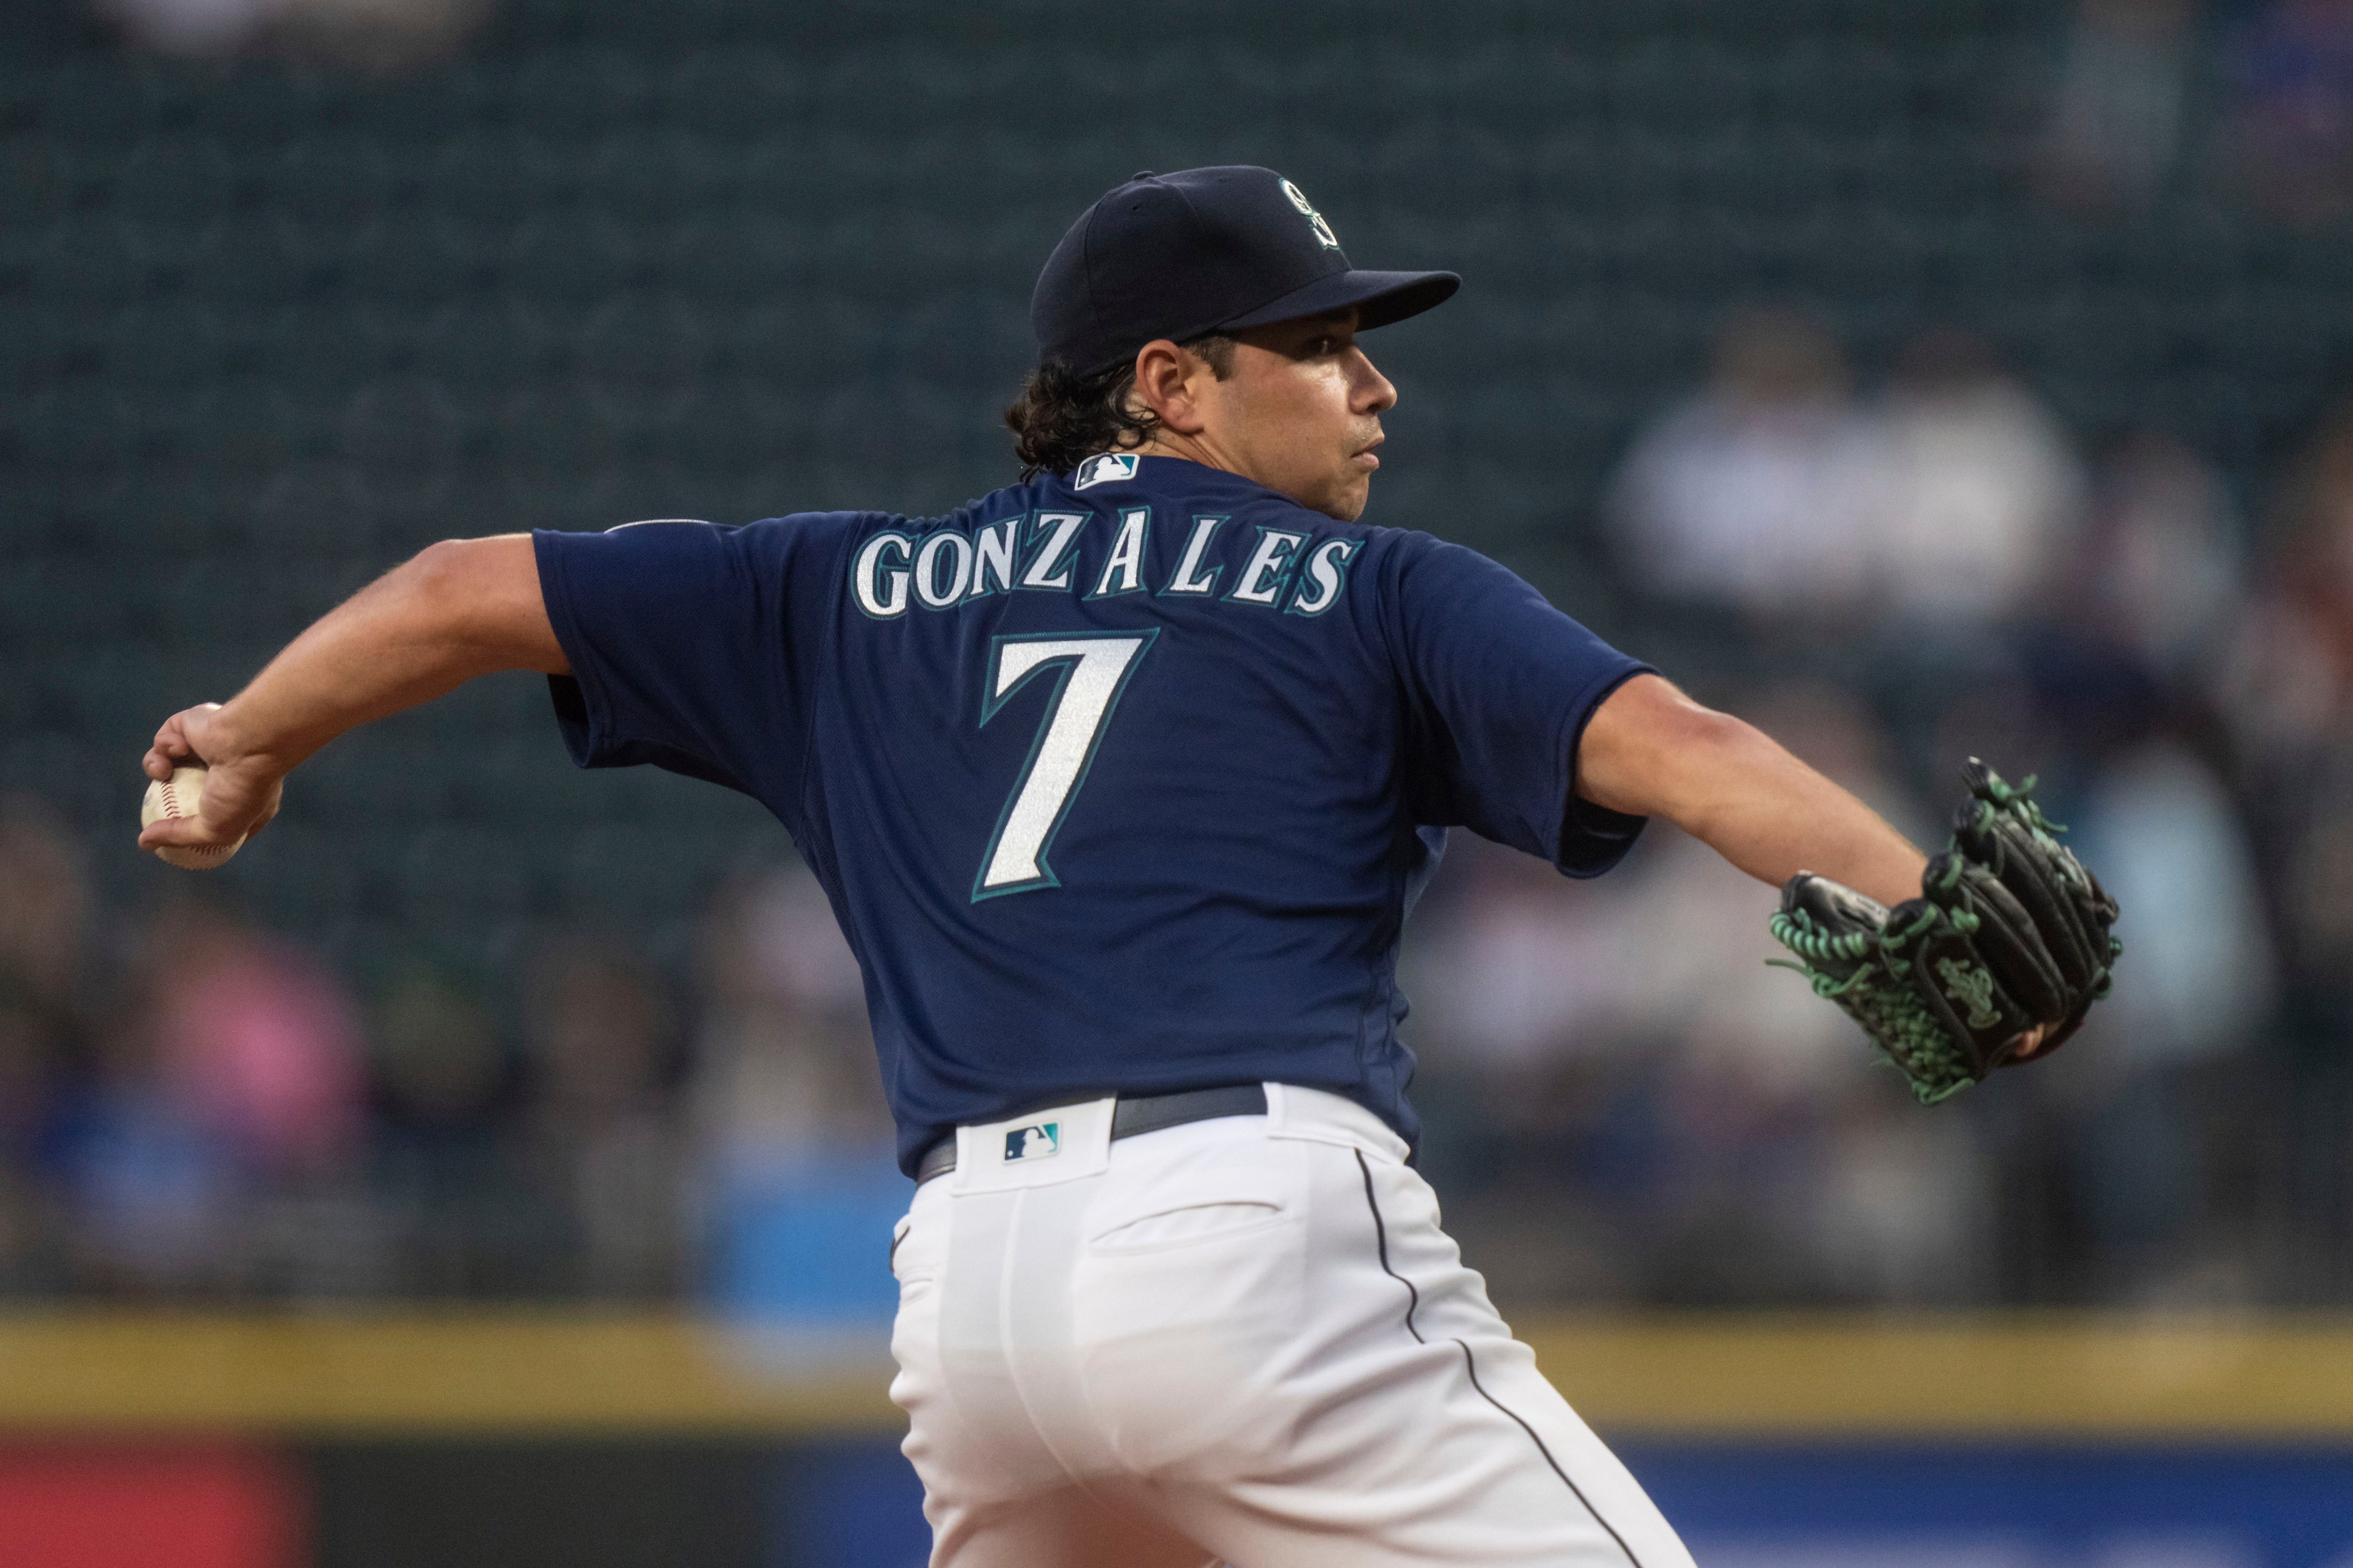 Mariners mailbag: Chris Flexen over Marco Gonzales in bullpen, record vs.  losing teams and more